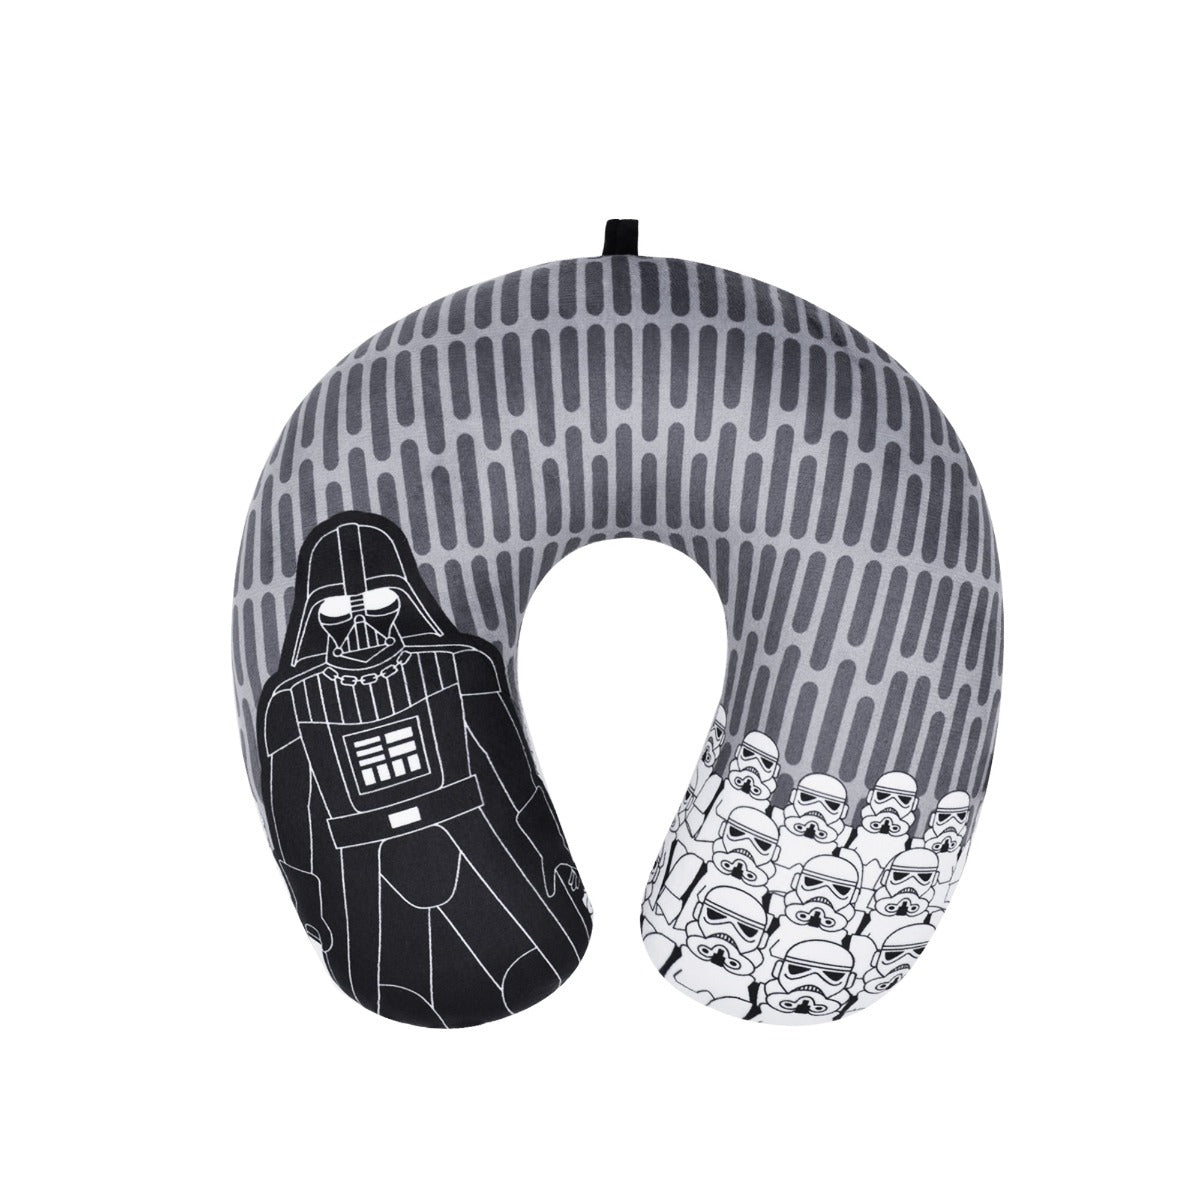 Ful Star Wars Darth Vader and Storm Trooper Travel Neck Pillow